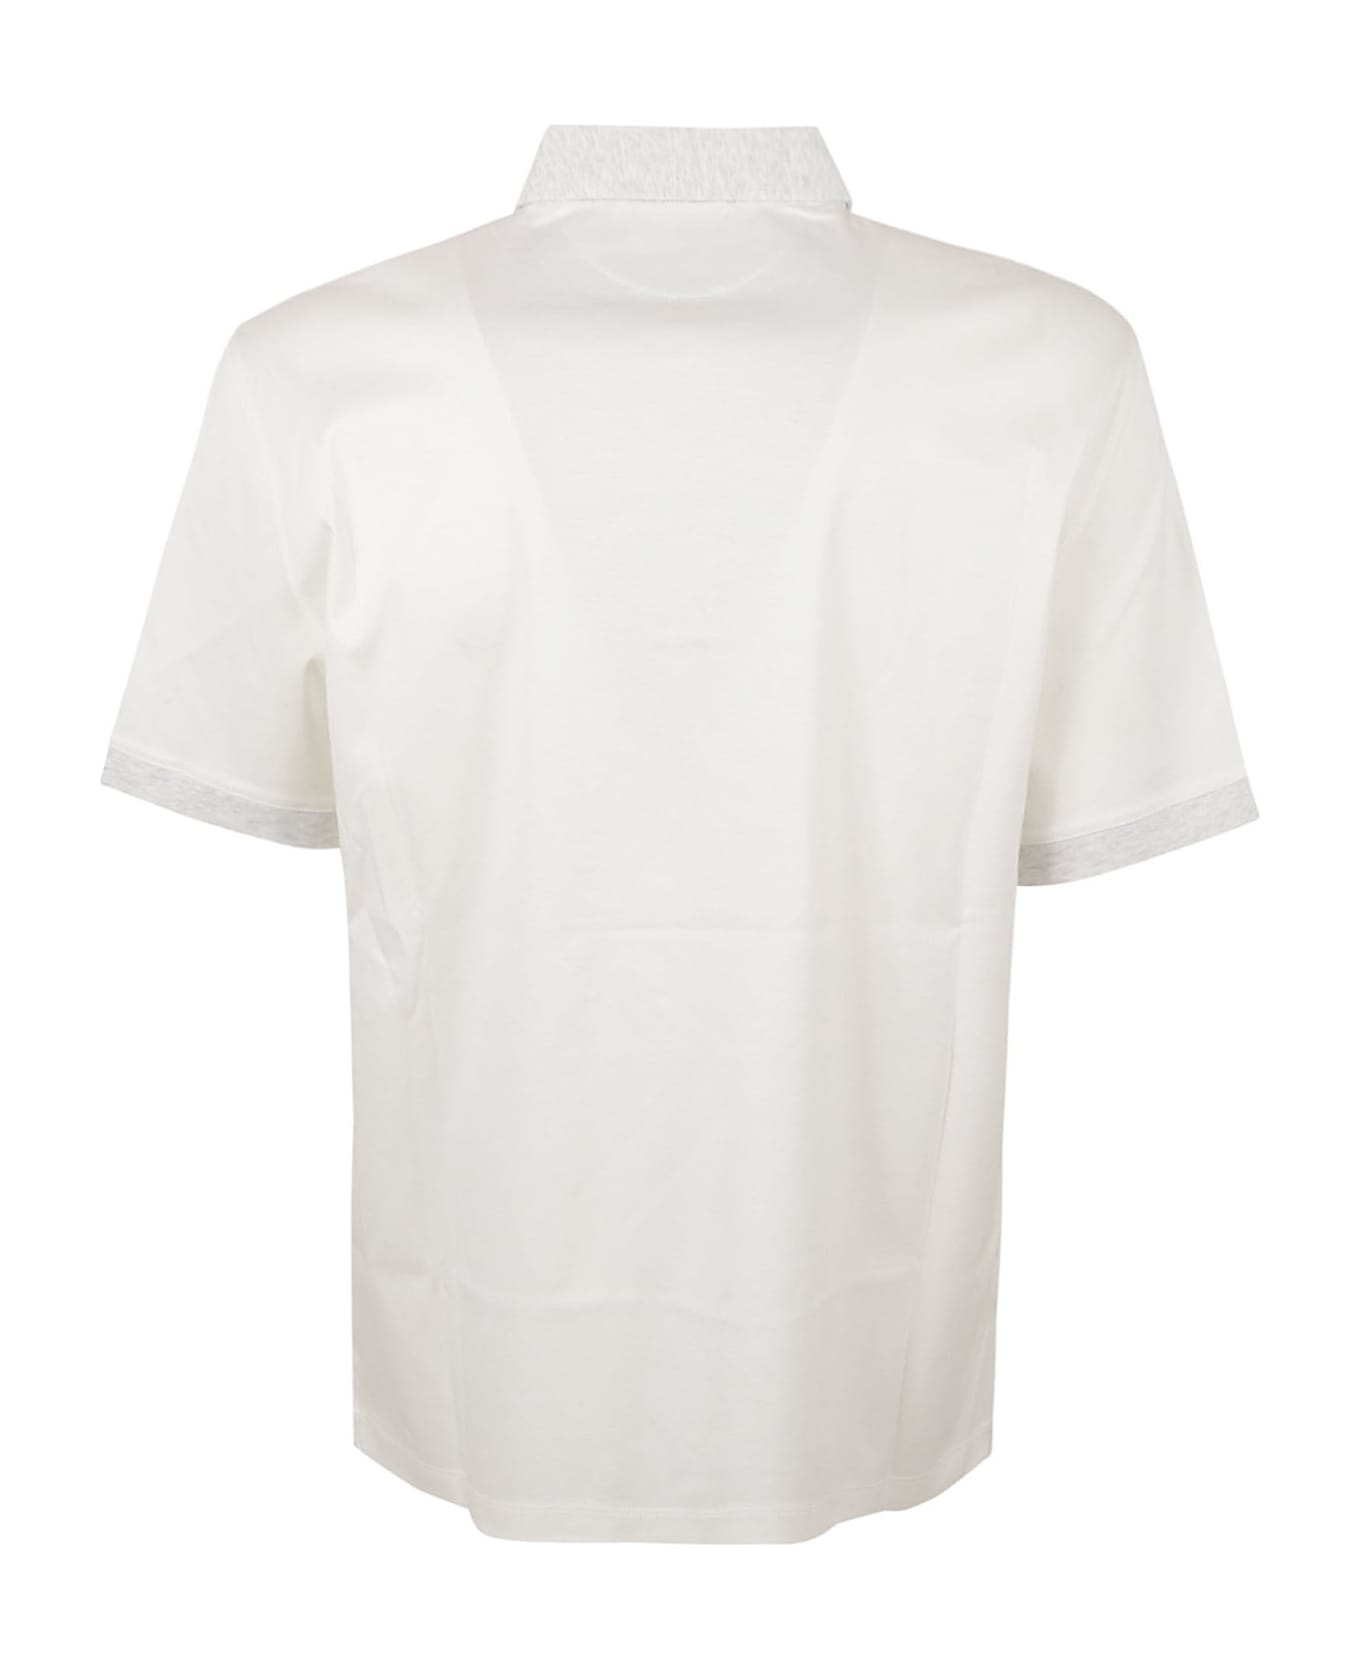 Brunello Cucinelli Logo Patched Polo Shirt - Off White/Pearl シャツ